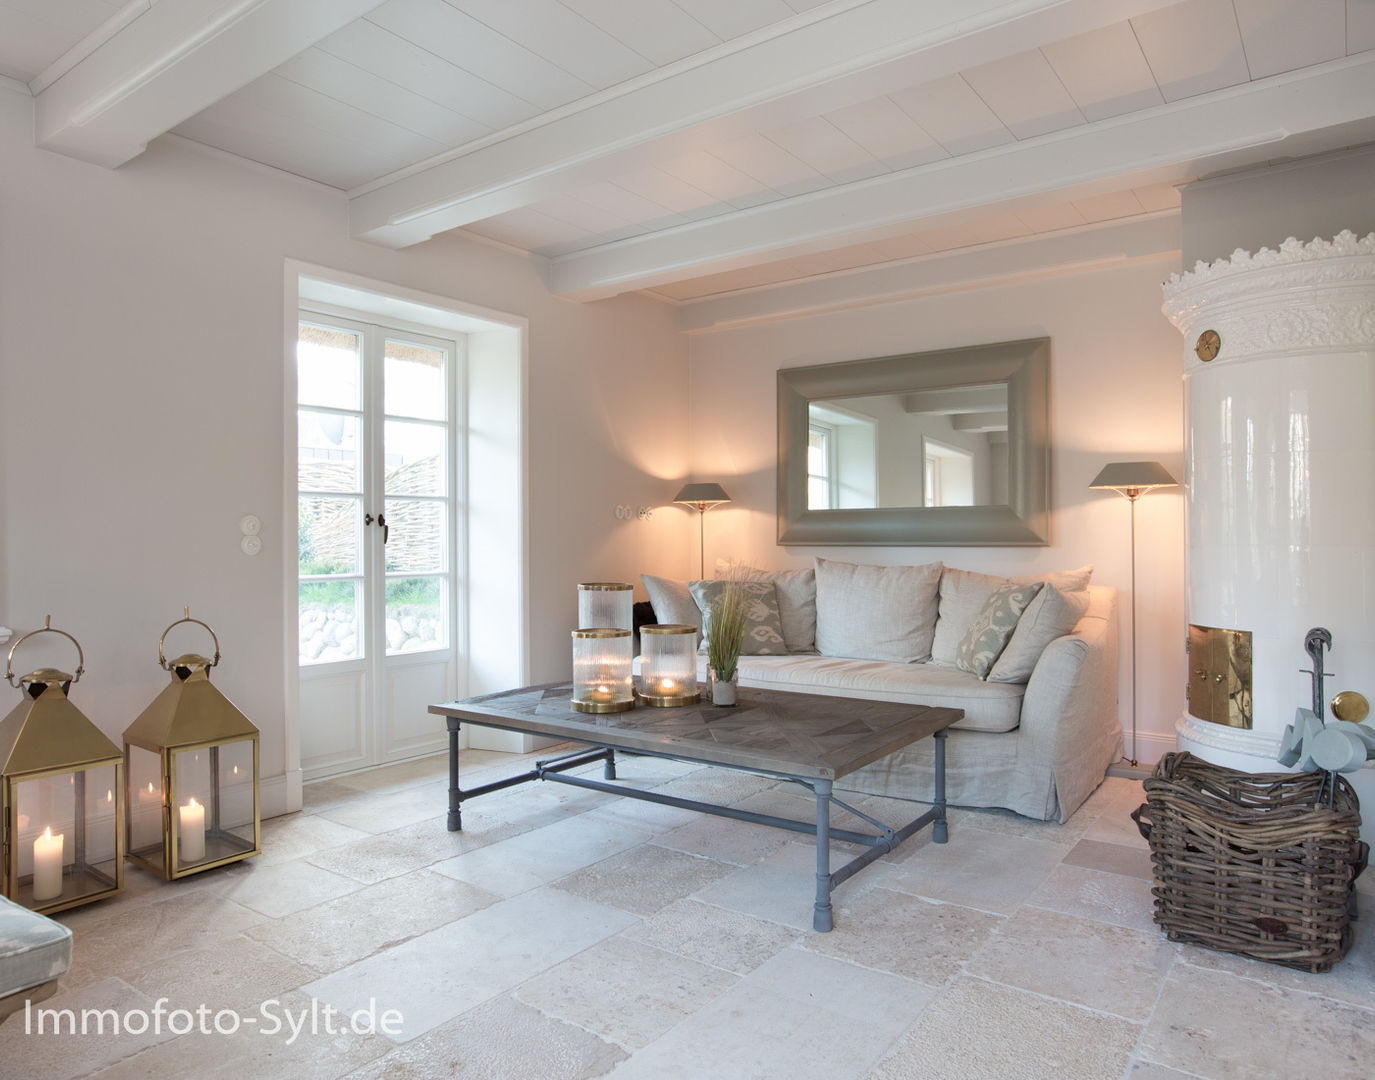 Reetdachhaus in List auf Sylt, Immofoto-Sylt Immofoto-Sylt Living room